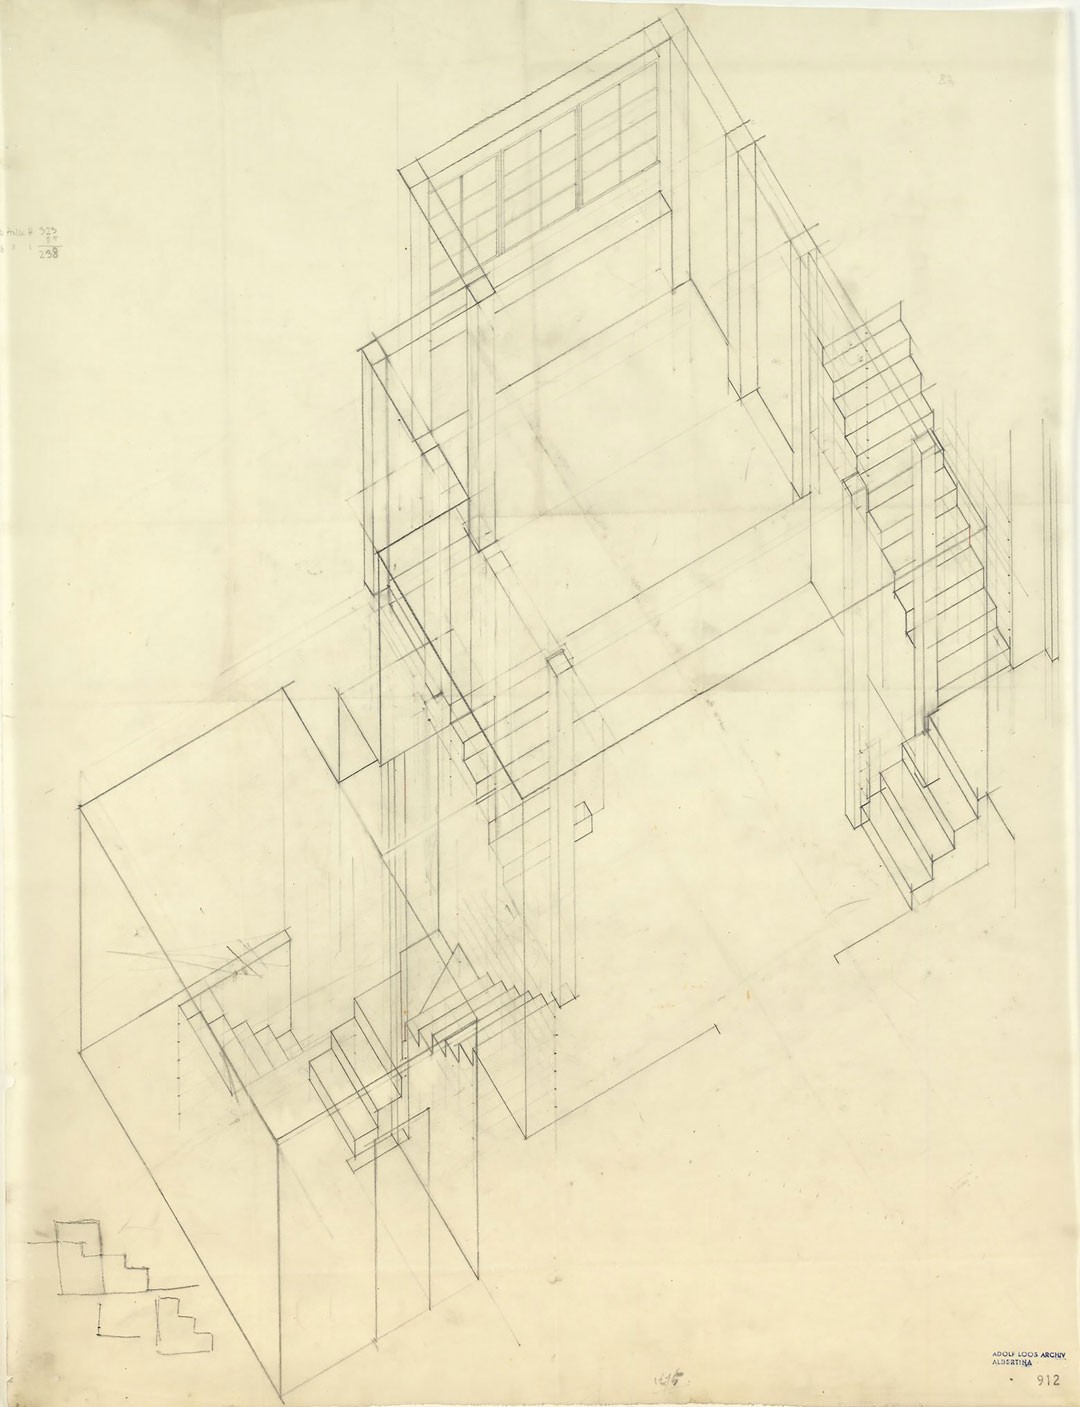 <BODY><div>Adolf Loos, House for Hans and Anny Moller, Vienna’s 18th district, Starkfriedgasse 19, axonometric view of the stairways, 1927 </div><div>Tracing paper, pencil </div><div>© ALBERTINA, Vienna</div><div> </div></BODY>